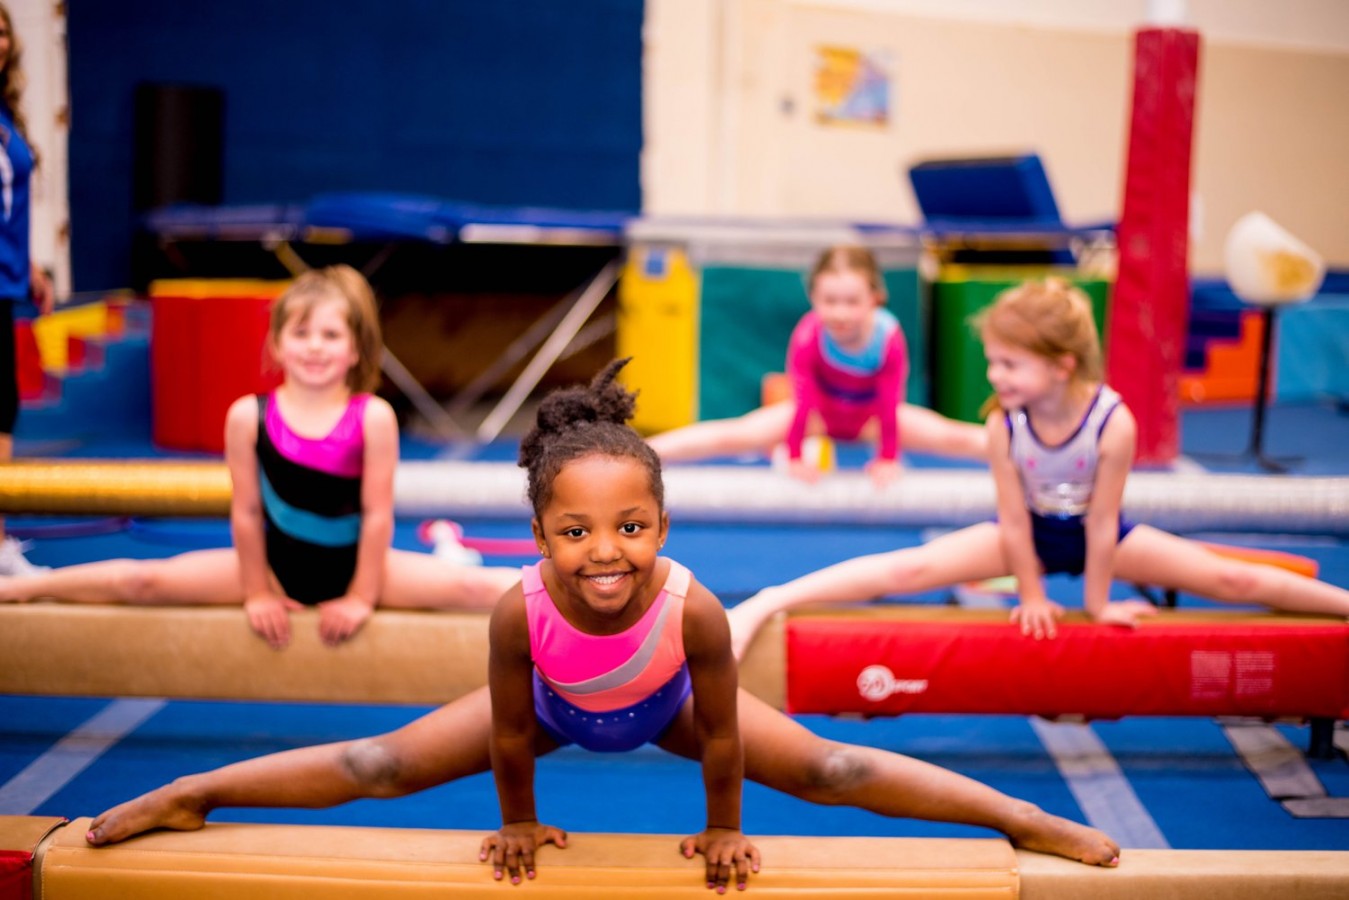  Recreational Gymnastics: Definition, Benefits, and More